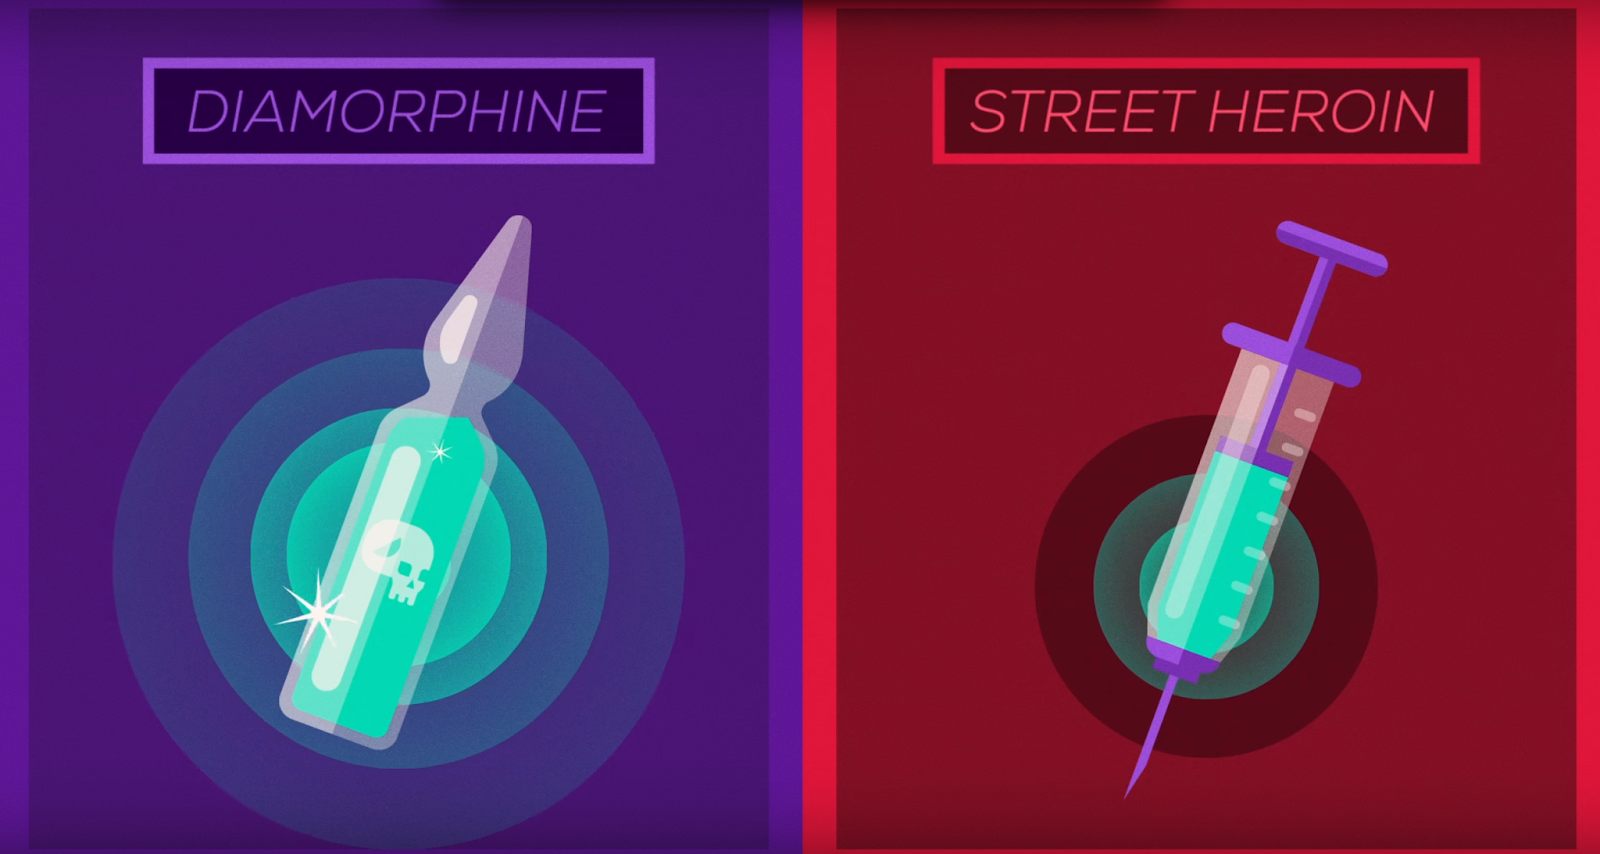 This Brilliant Animated Video Will Forever Change Your Views on Addiction